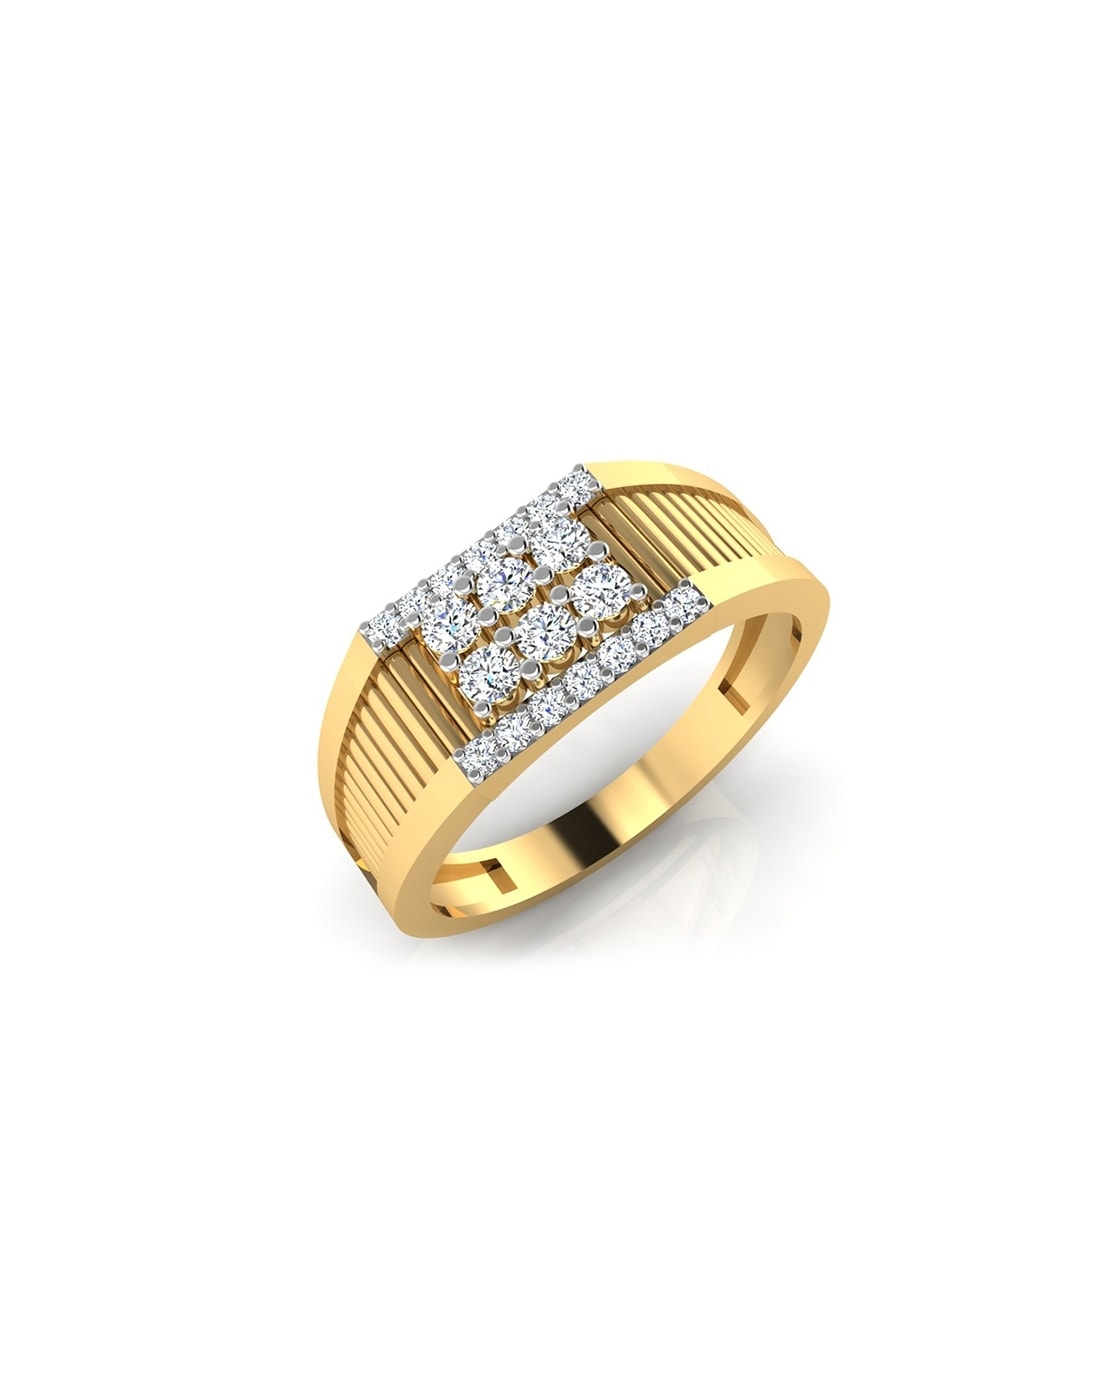 Buy quality 22k gold plain universal ring in Ahmedabad